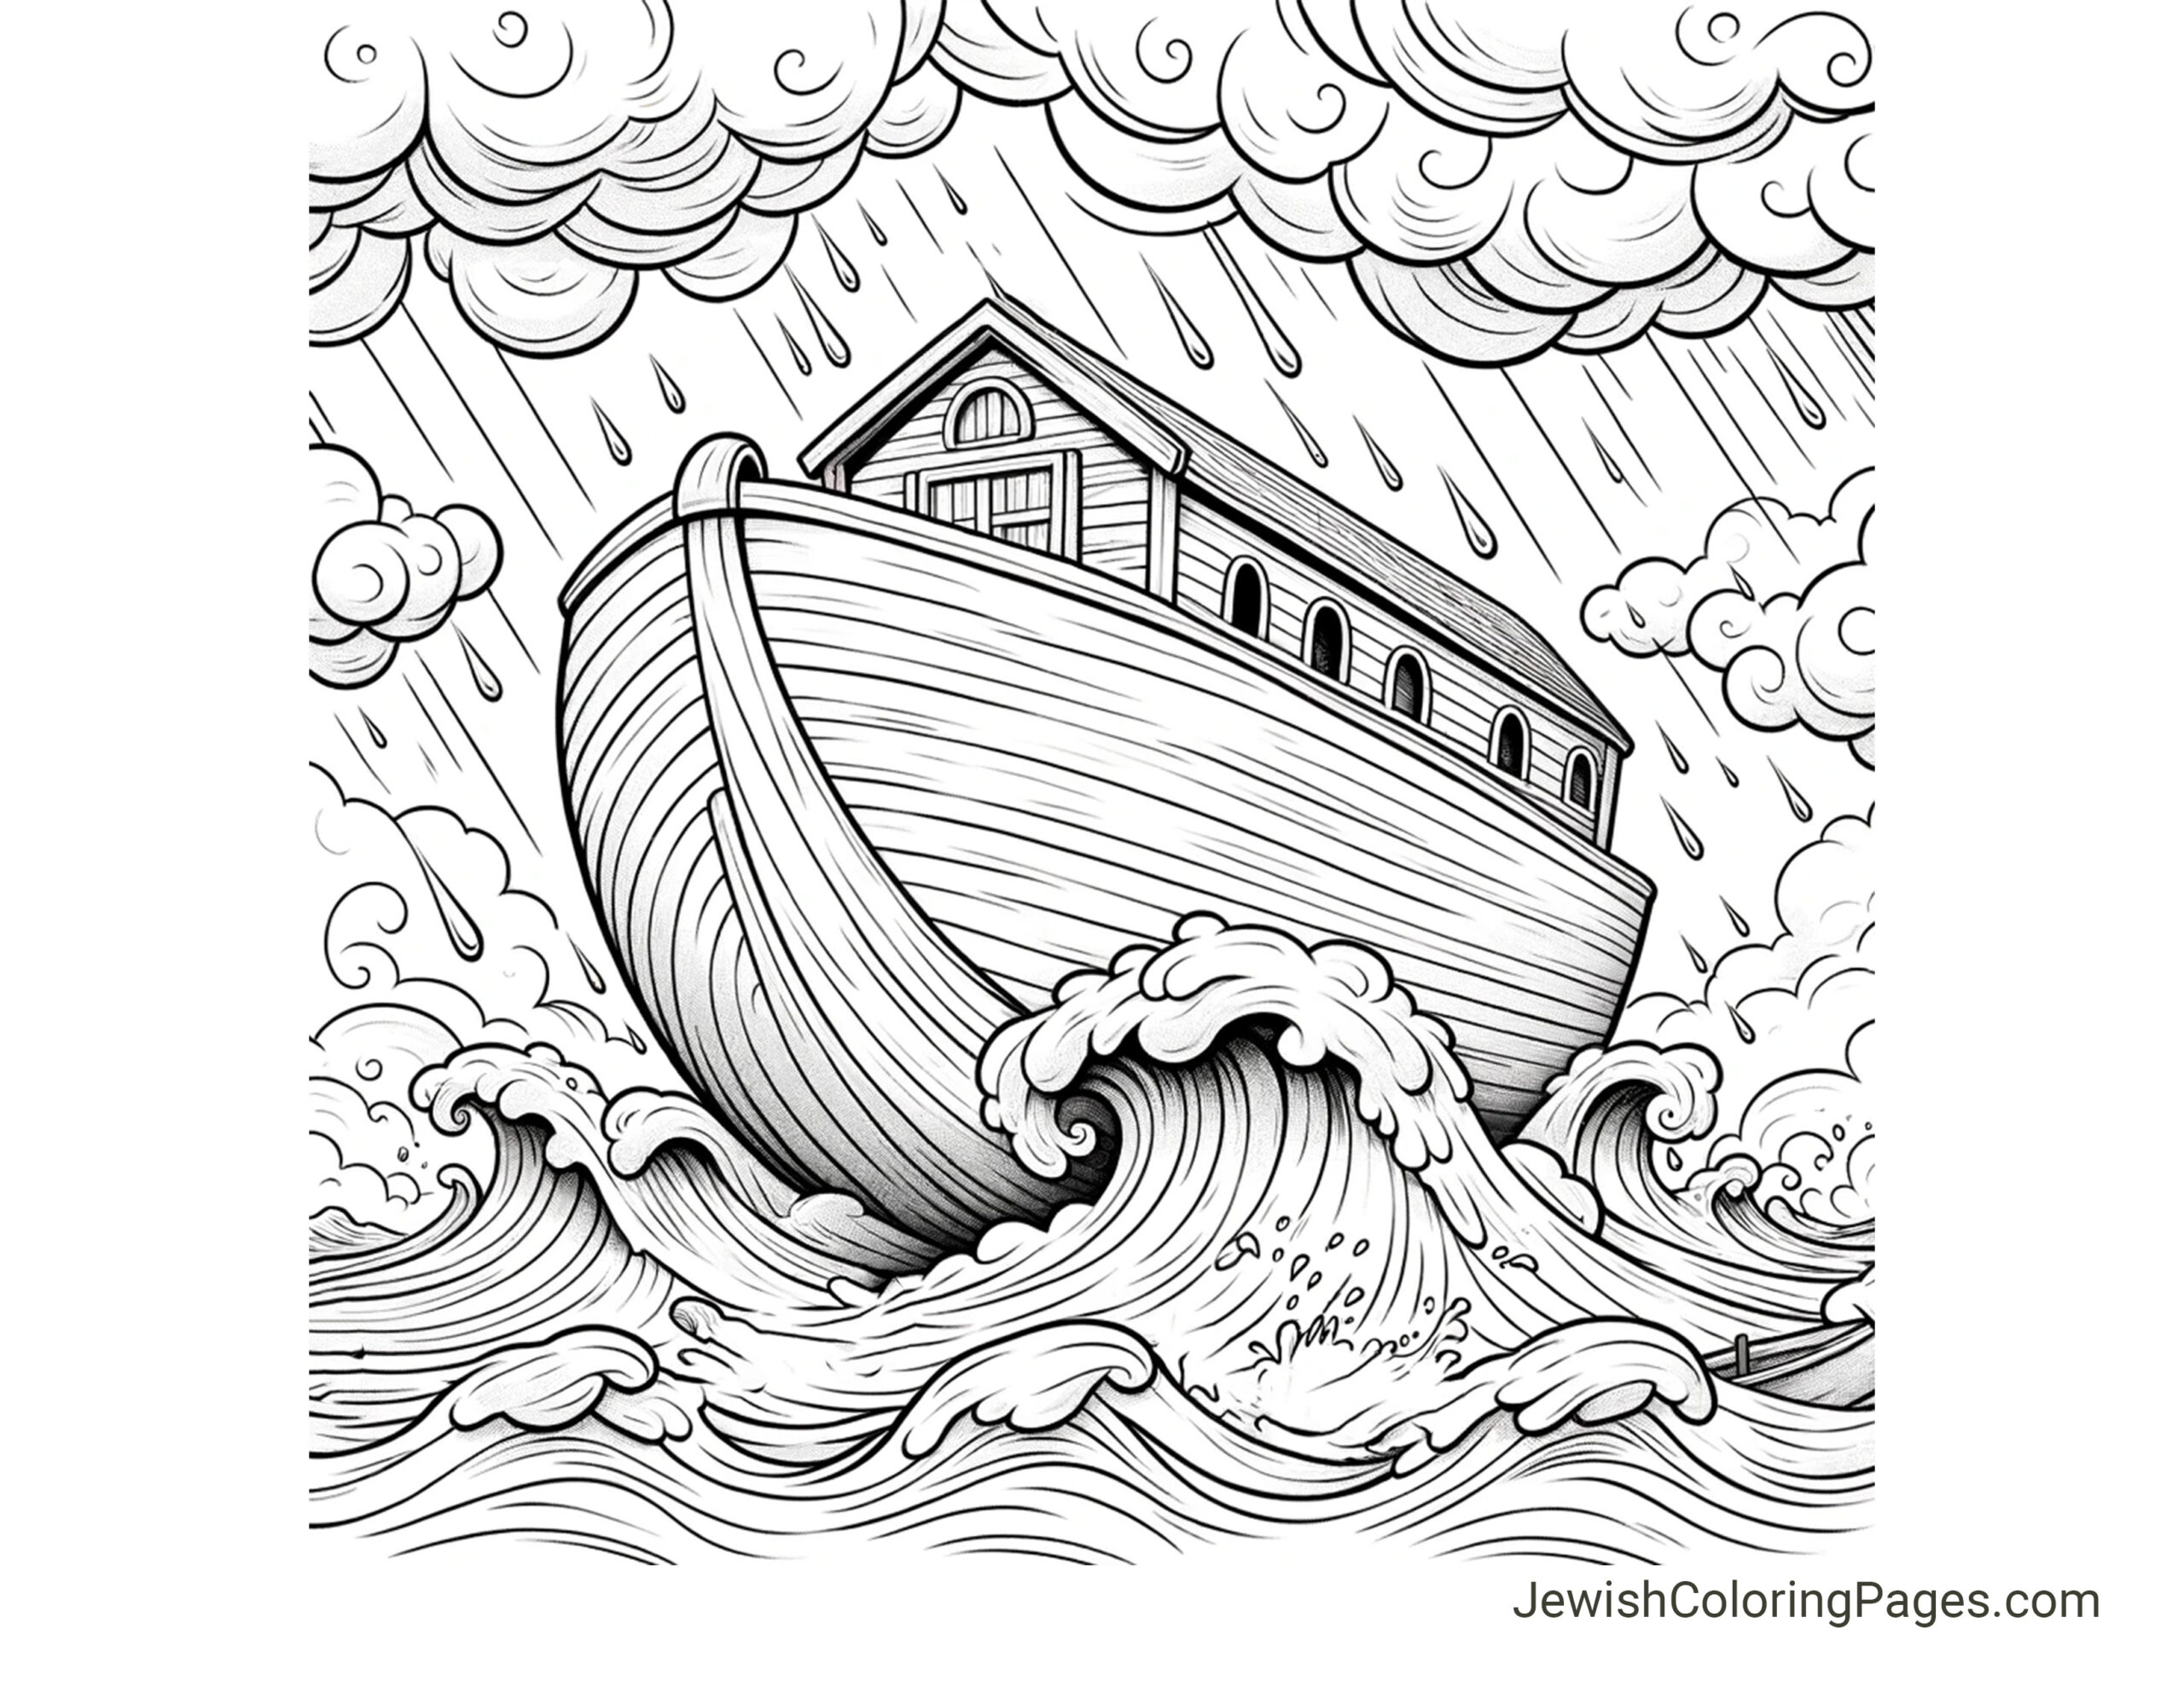 Noah's Ark cresting a wave coloring page